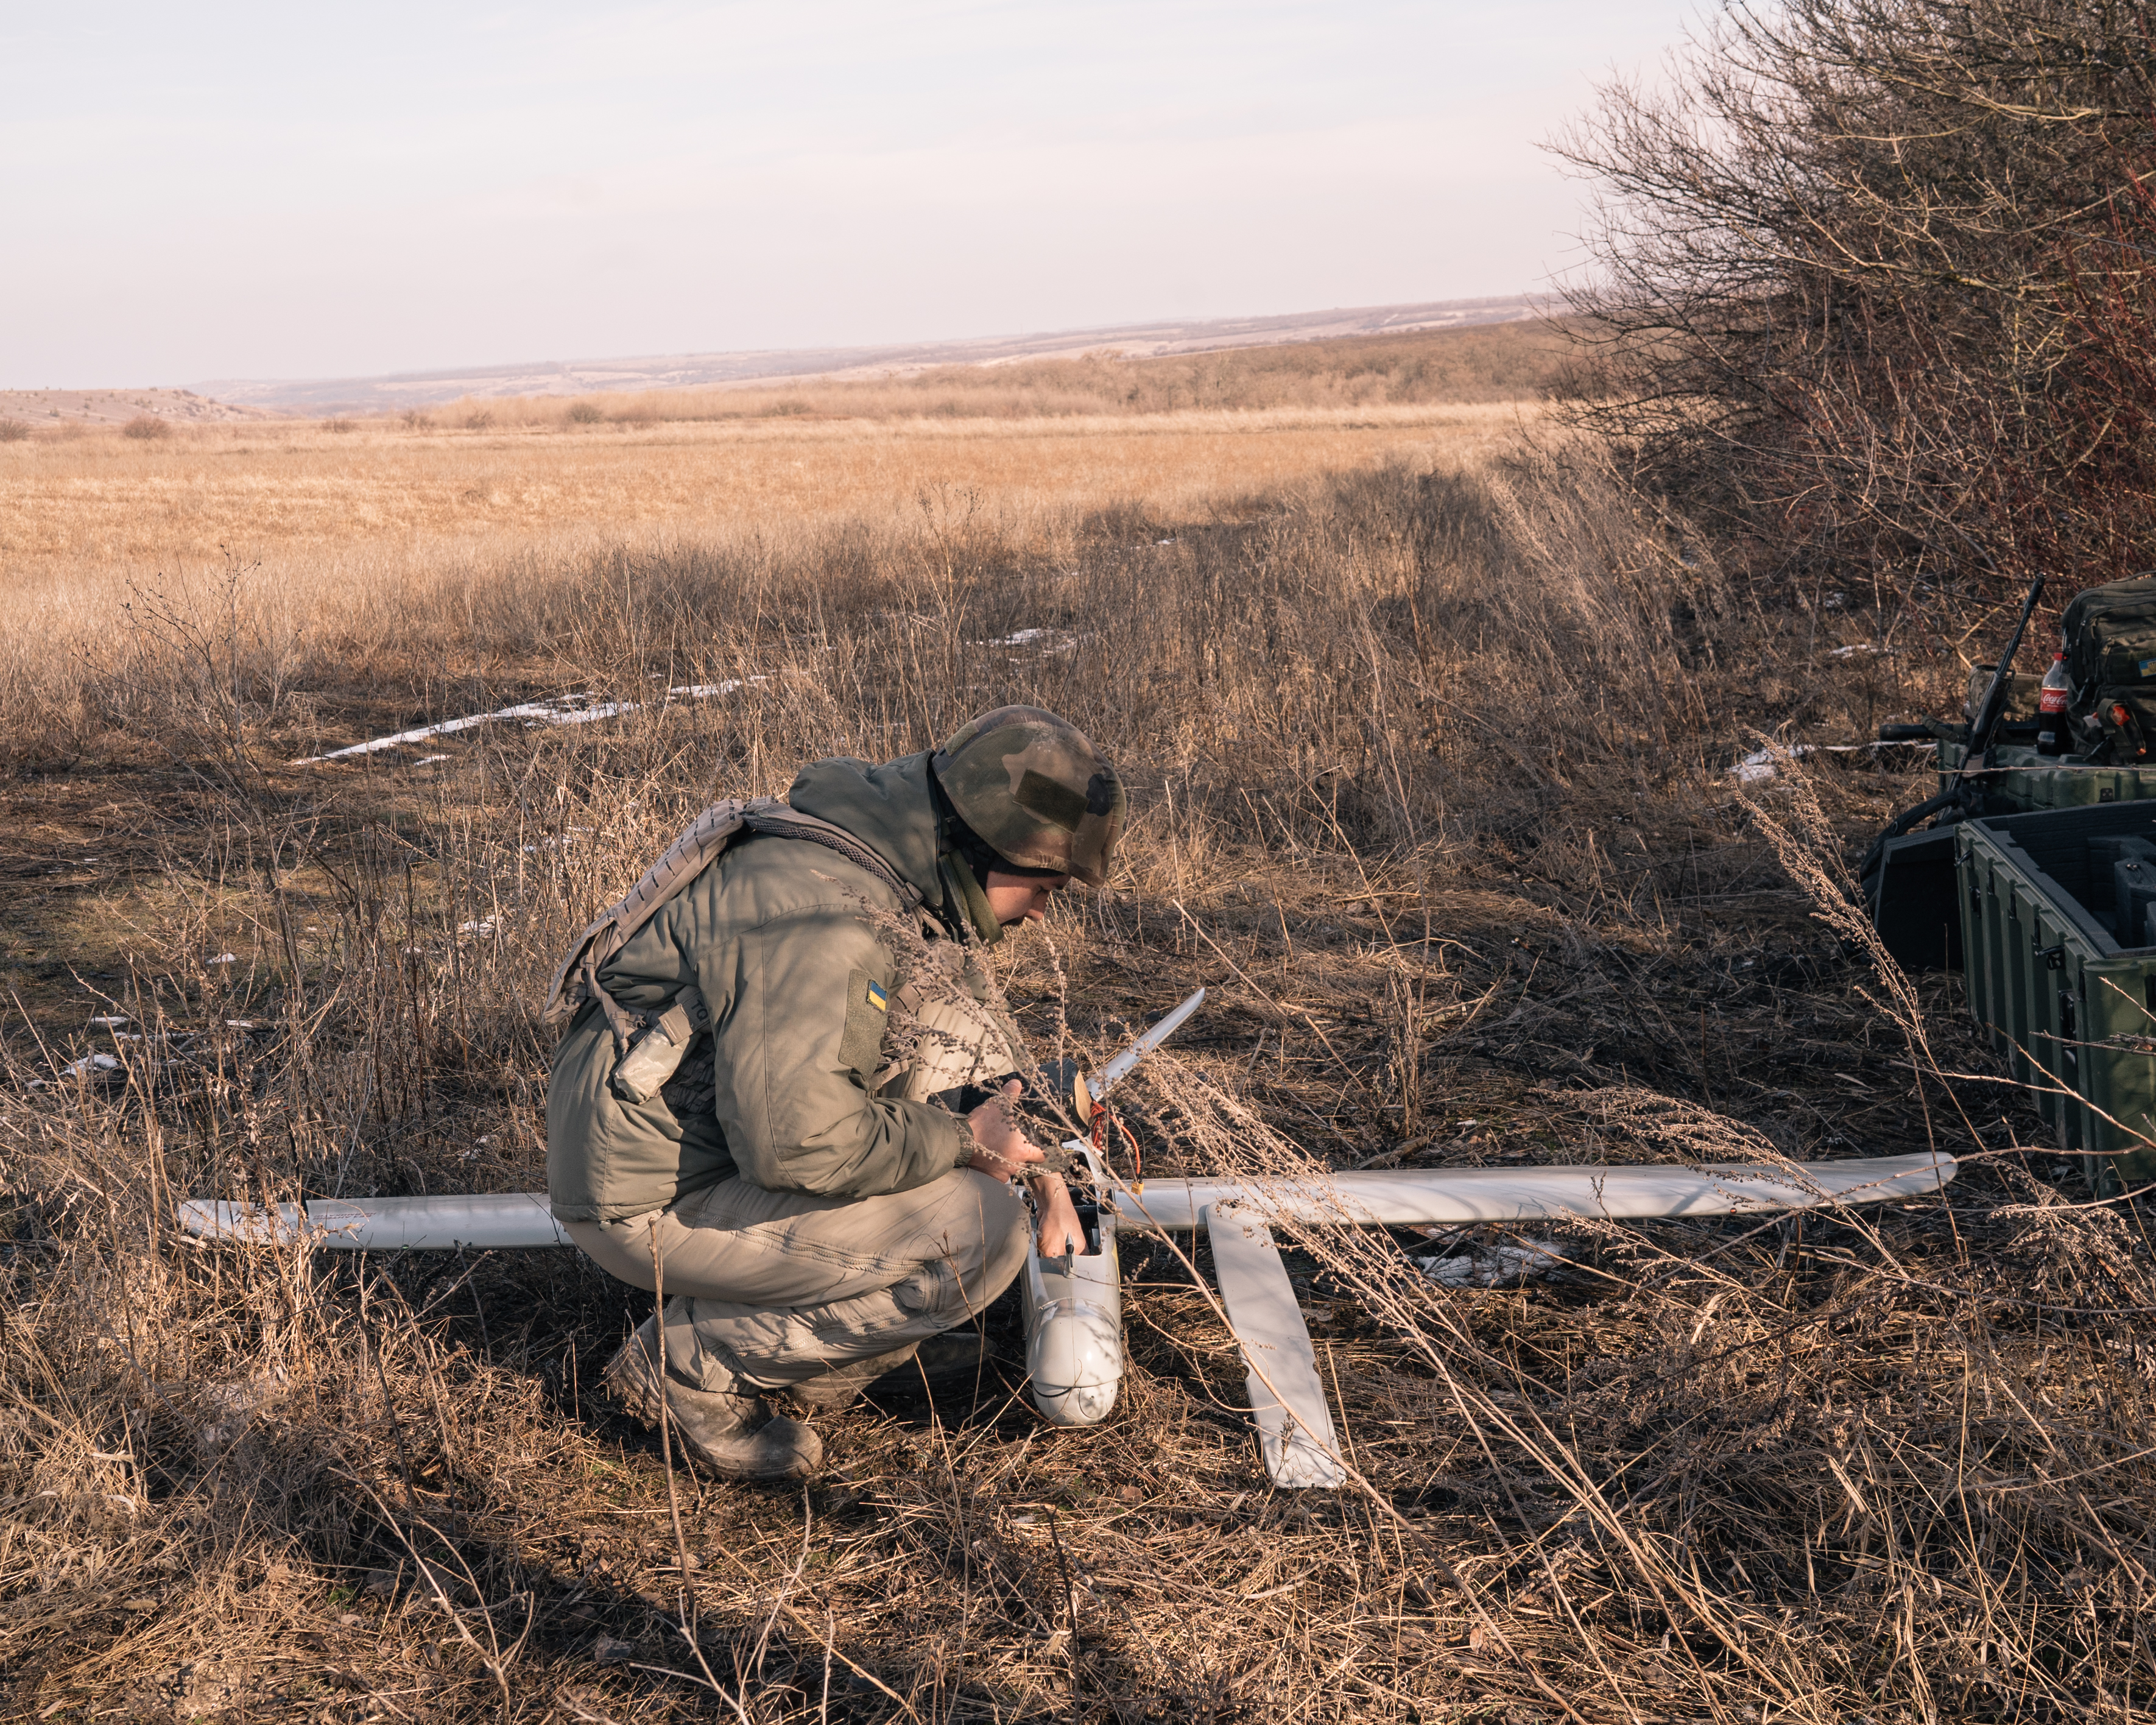 drones are crowding ukraine’s skies, largely paralyzing battlefield